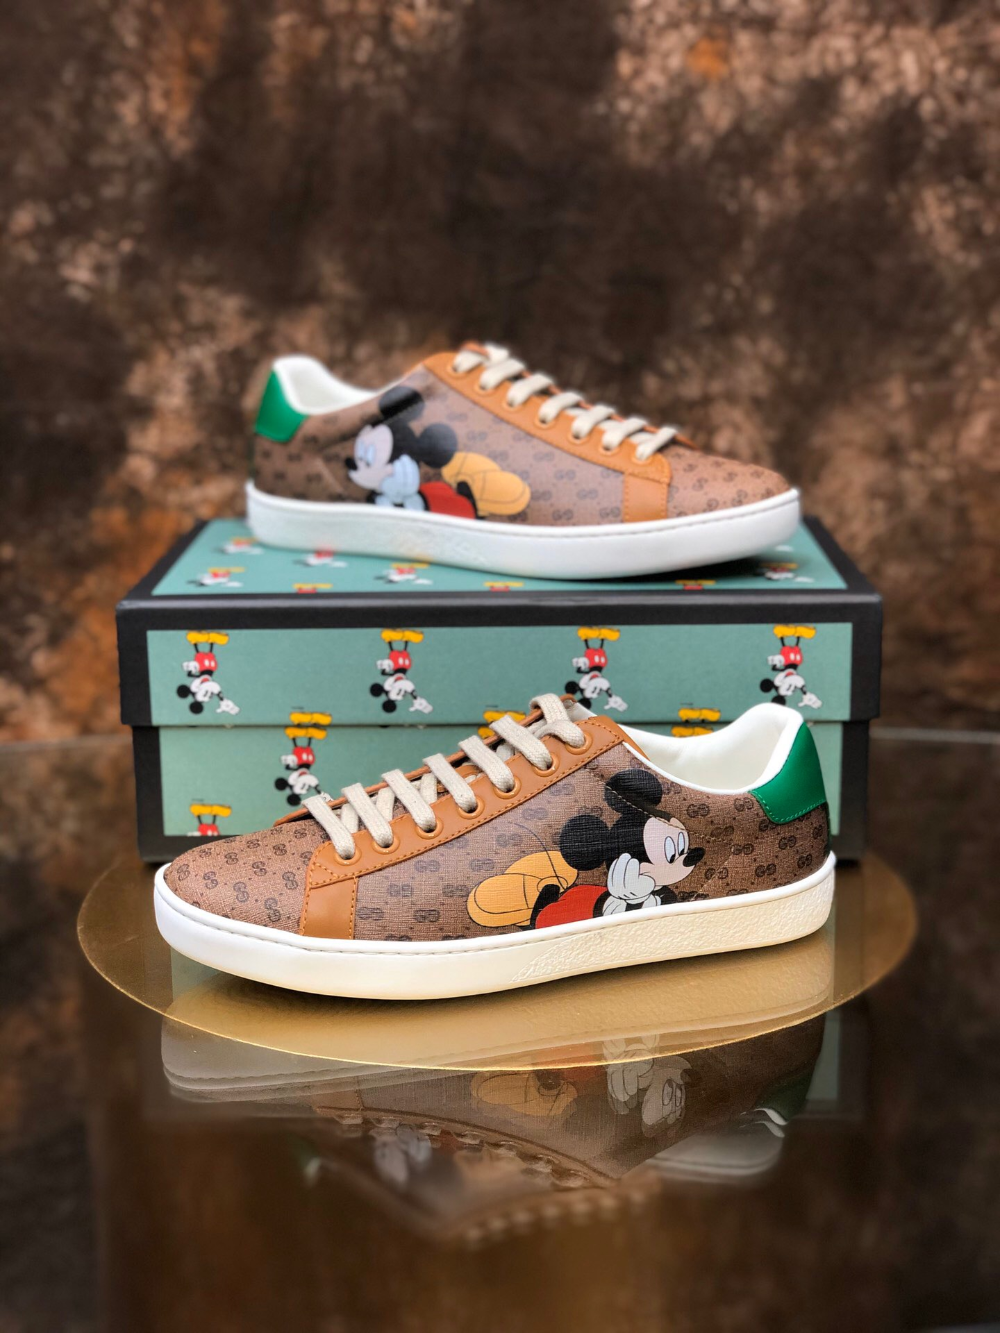 Men's GG Disney x Gucci Ace sneaker 602548 HWM10 8961. Gucci ace sneakers, Sneakers, Mickey mouse shoes